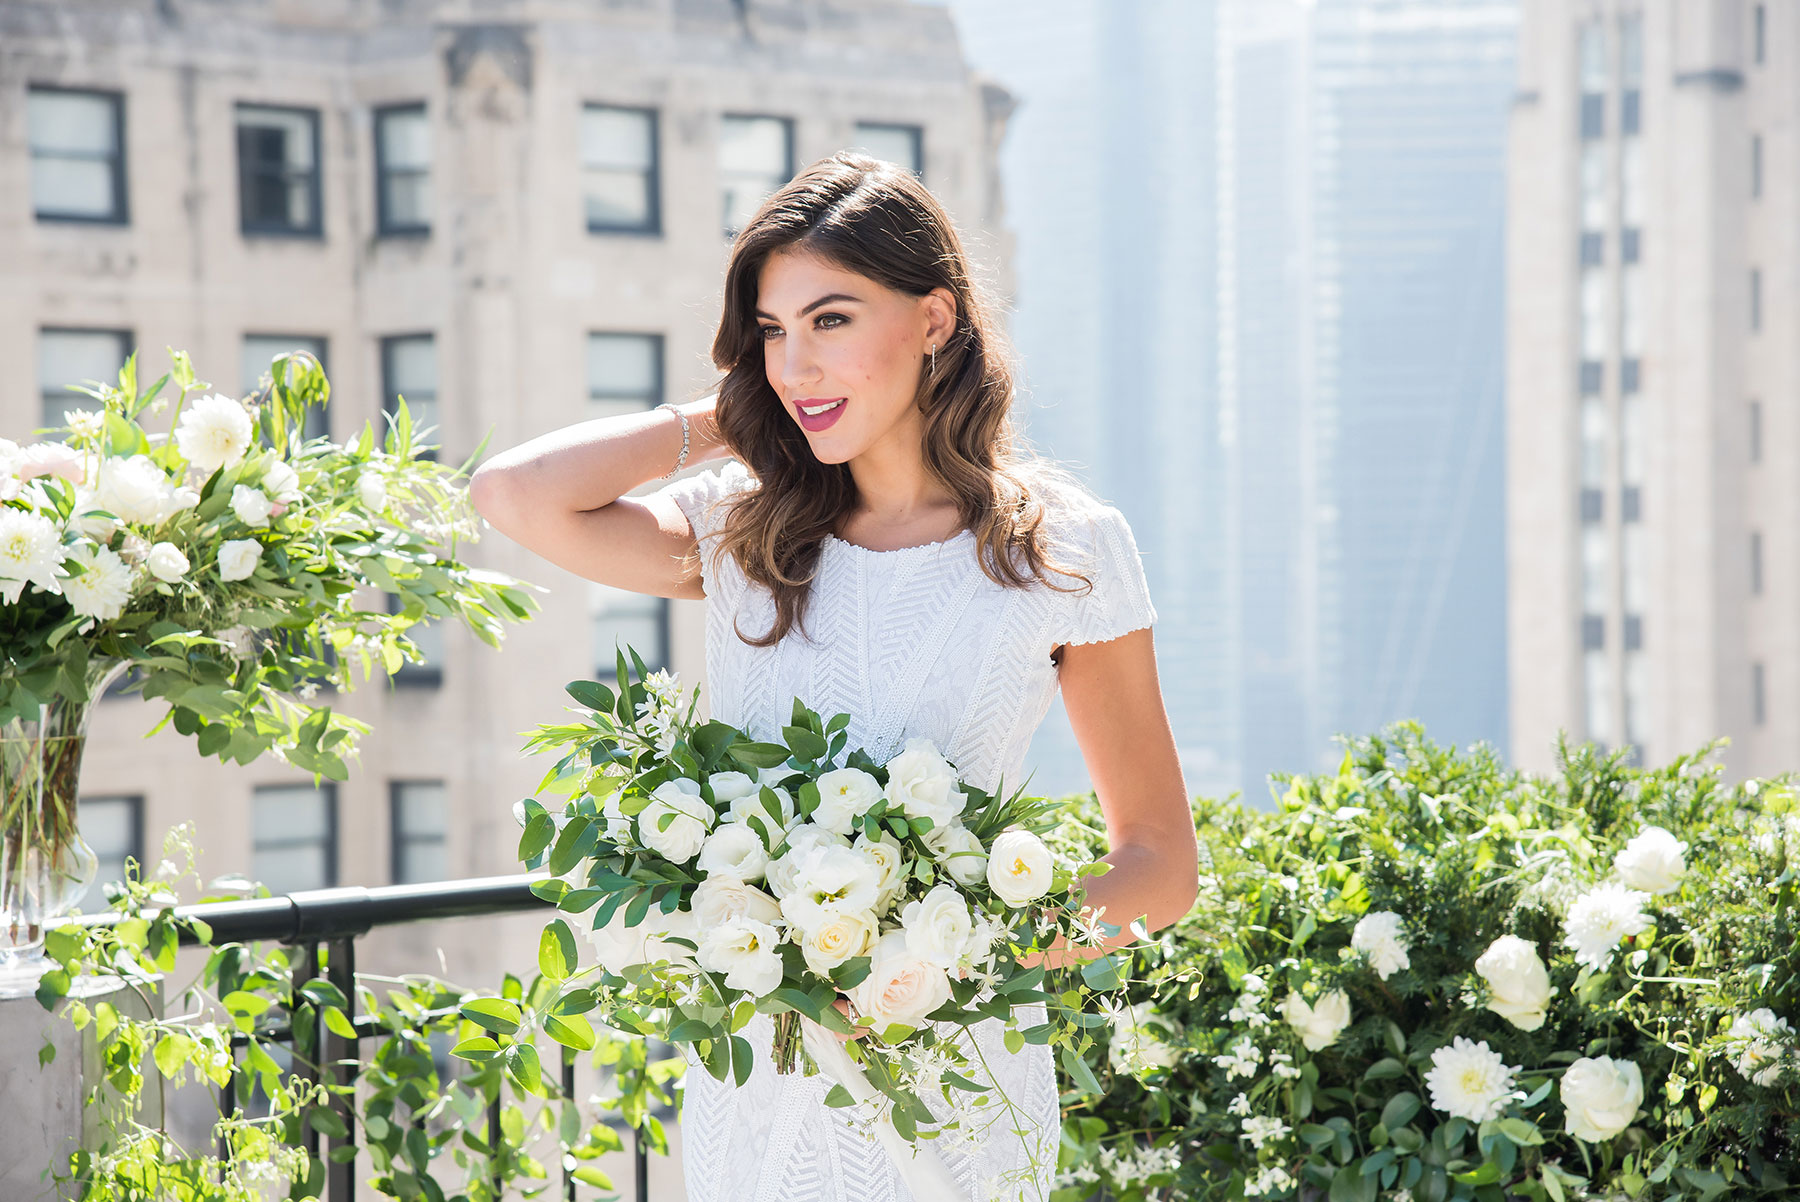 Timeless Gift Giving In The Perfect Intimate Rooftop Wedding Setting